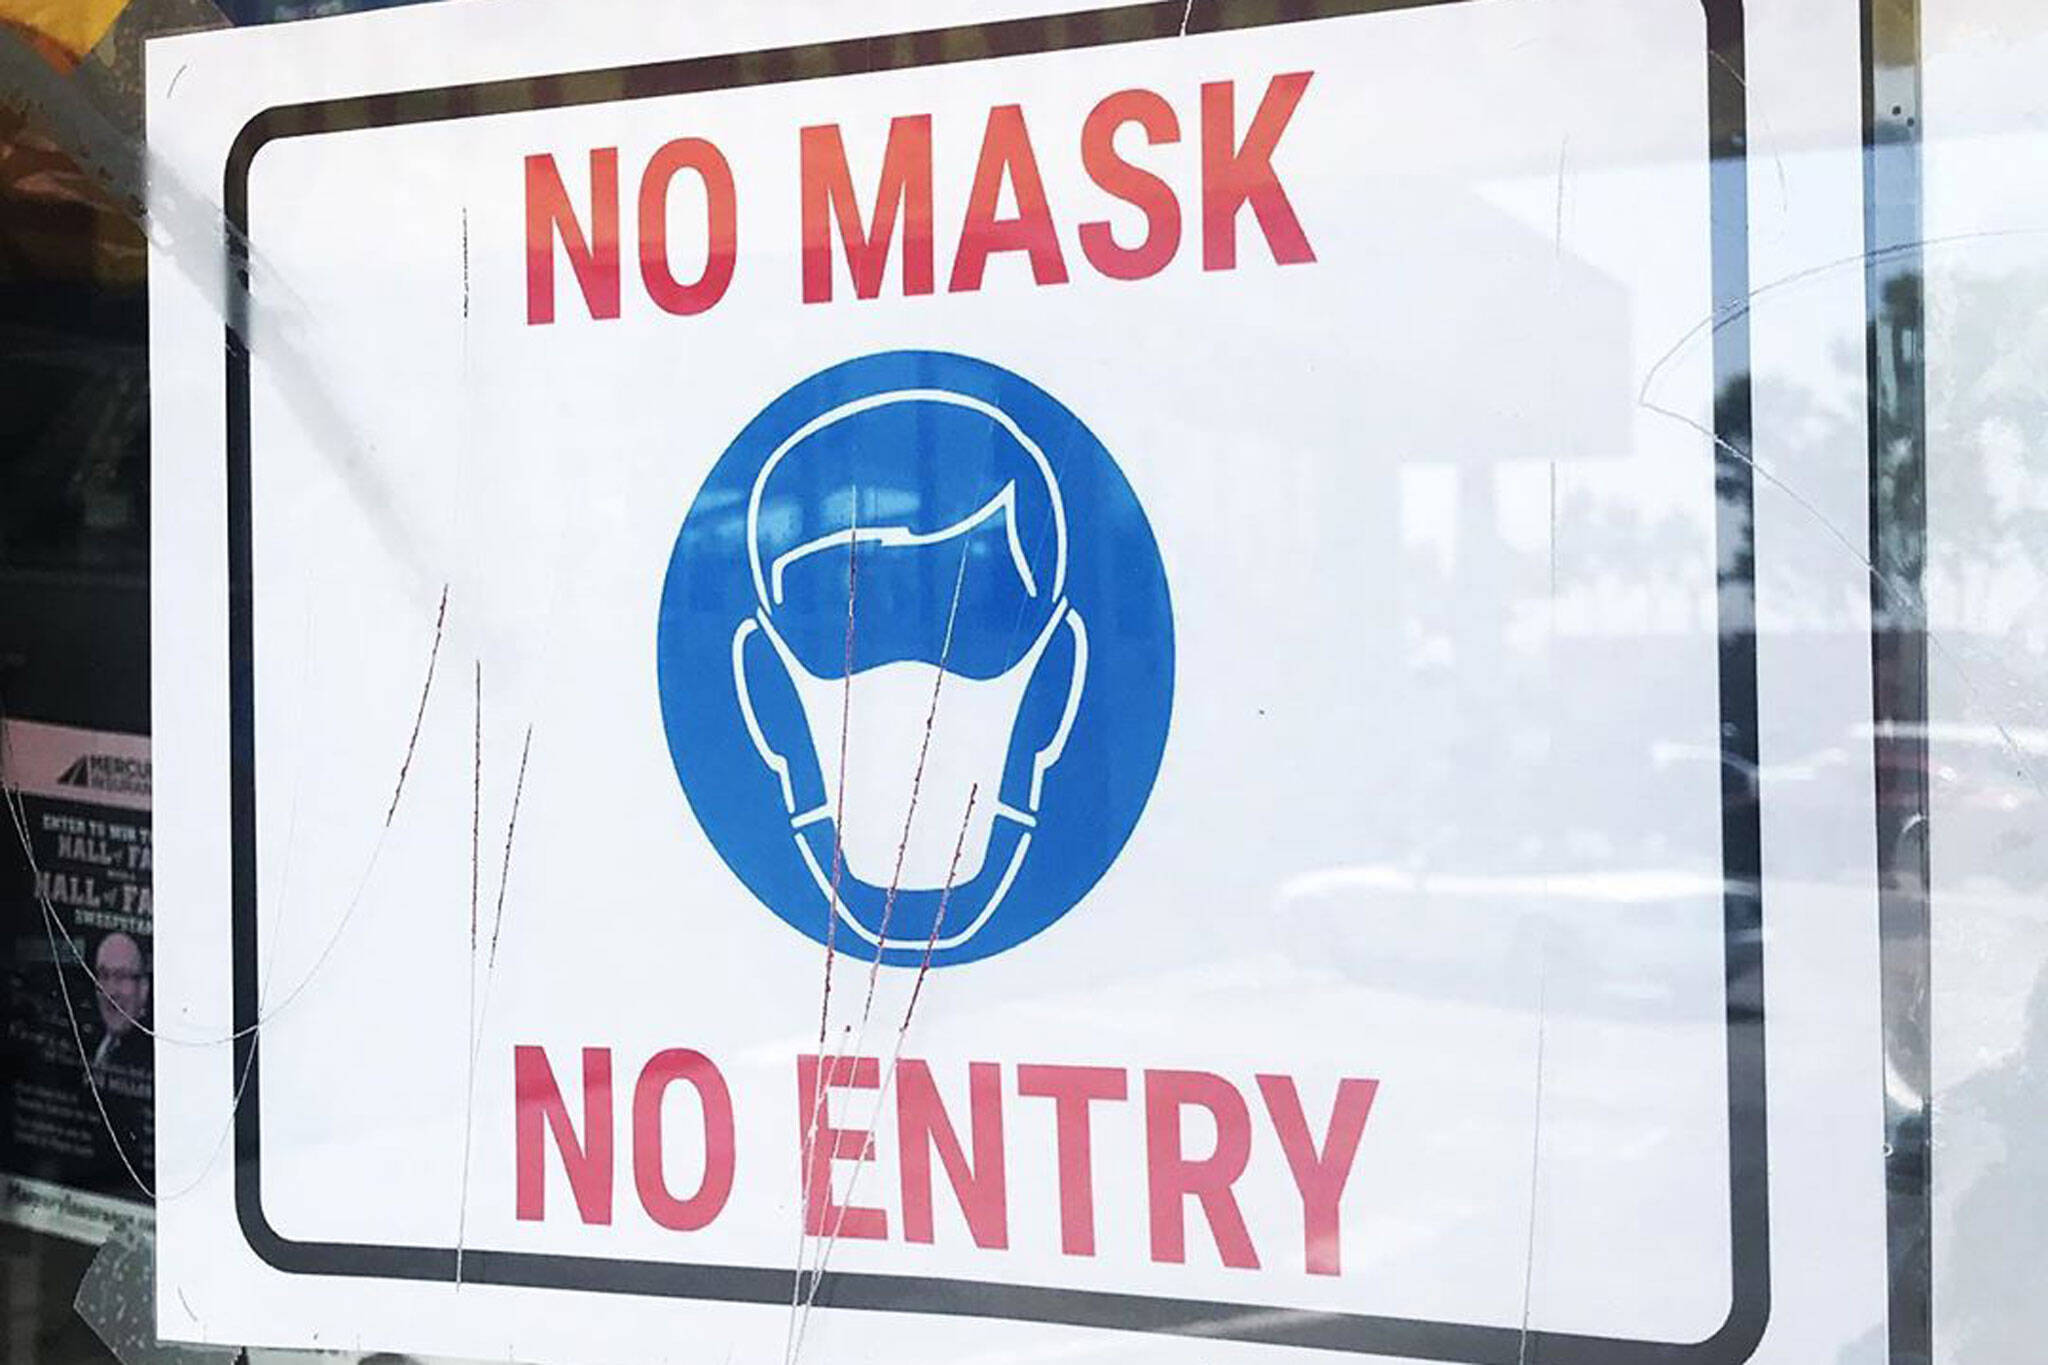 Here's what Toronto store owners think of people who won't wear face masks